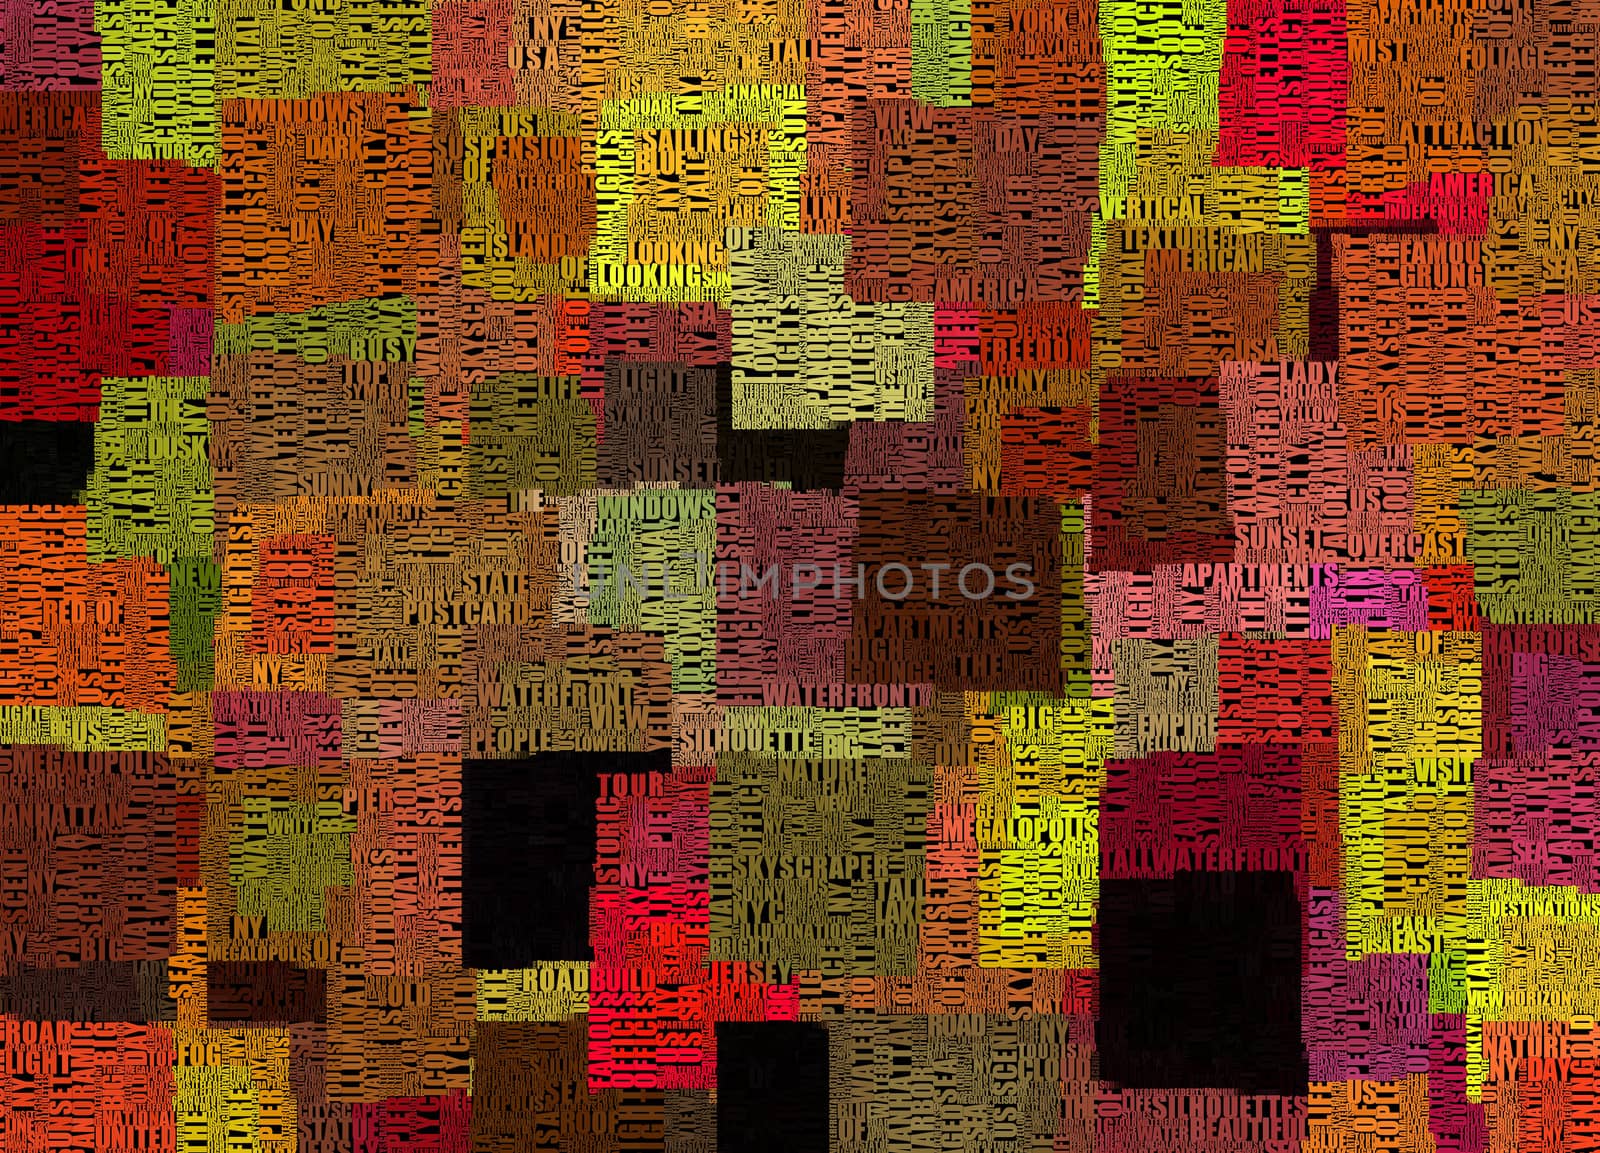 Square abstraction. Image composed of text and words